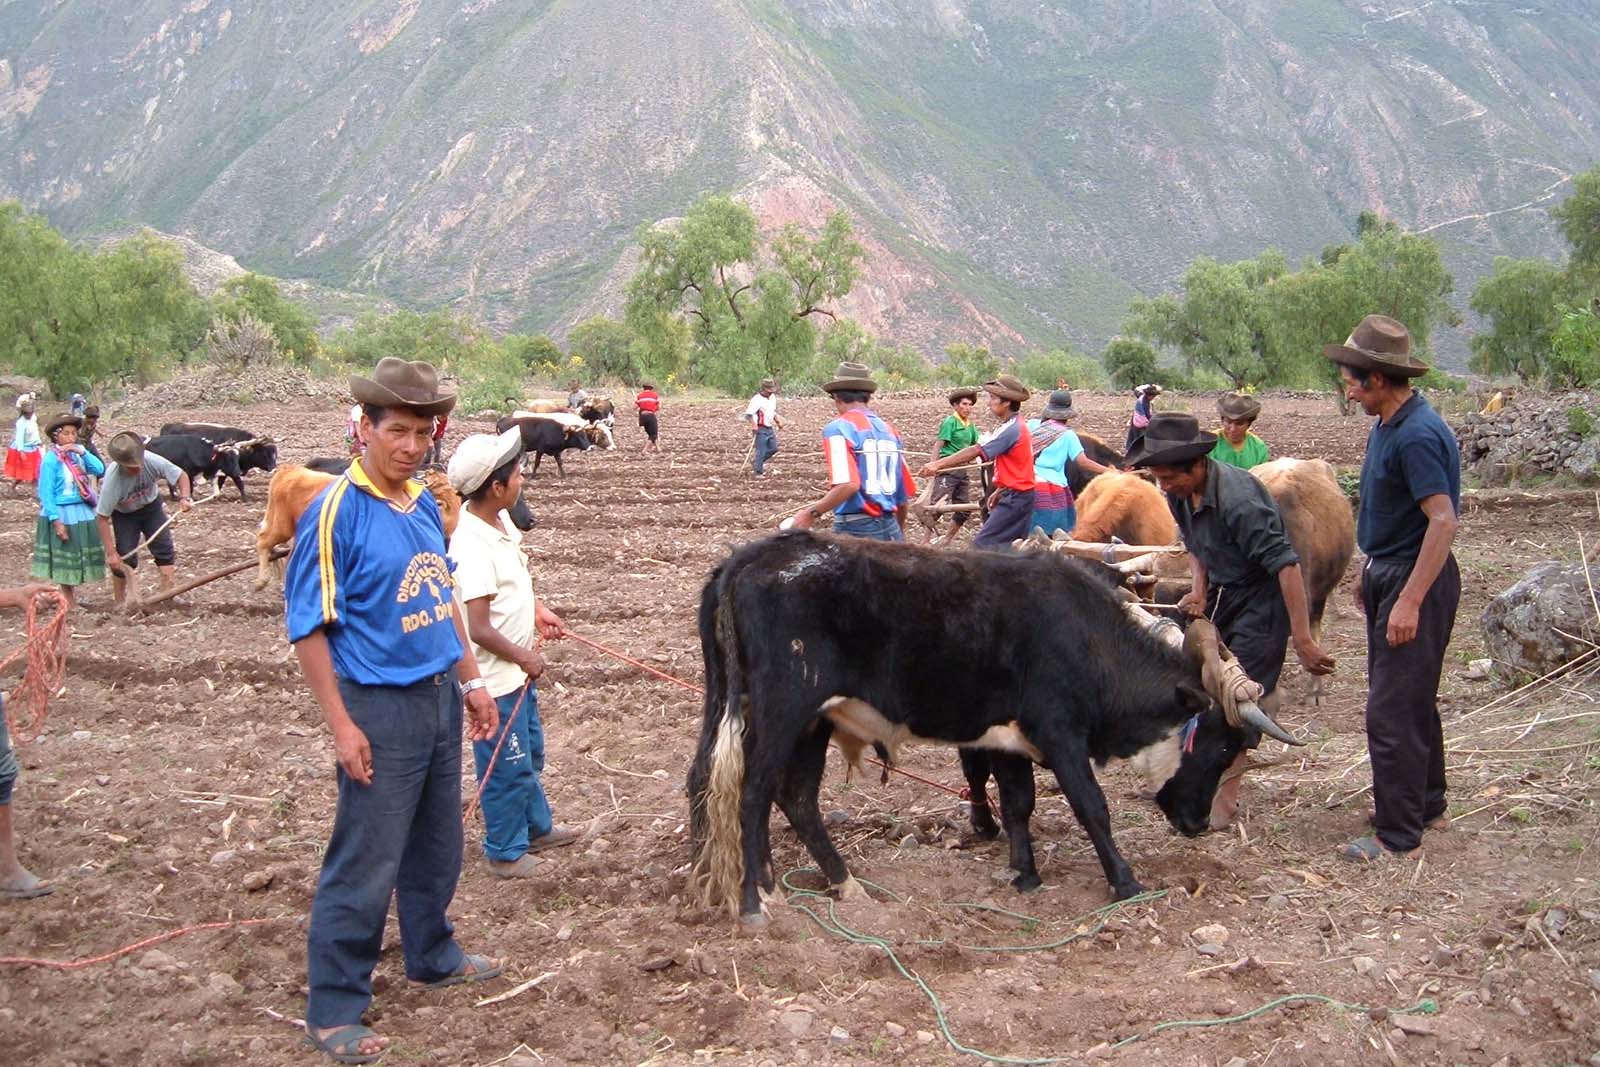 Farmers on a dirt field using hoes and cattle to till the soil.